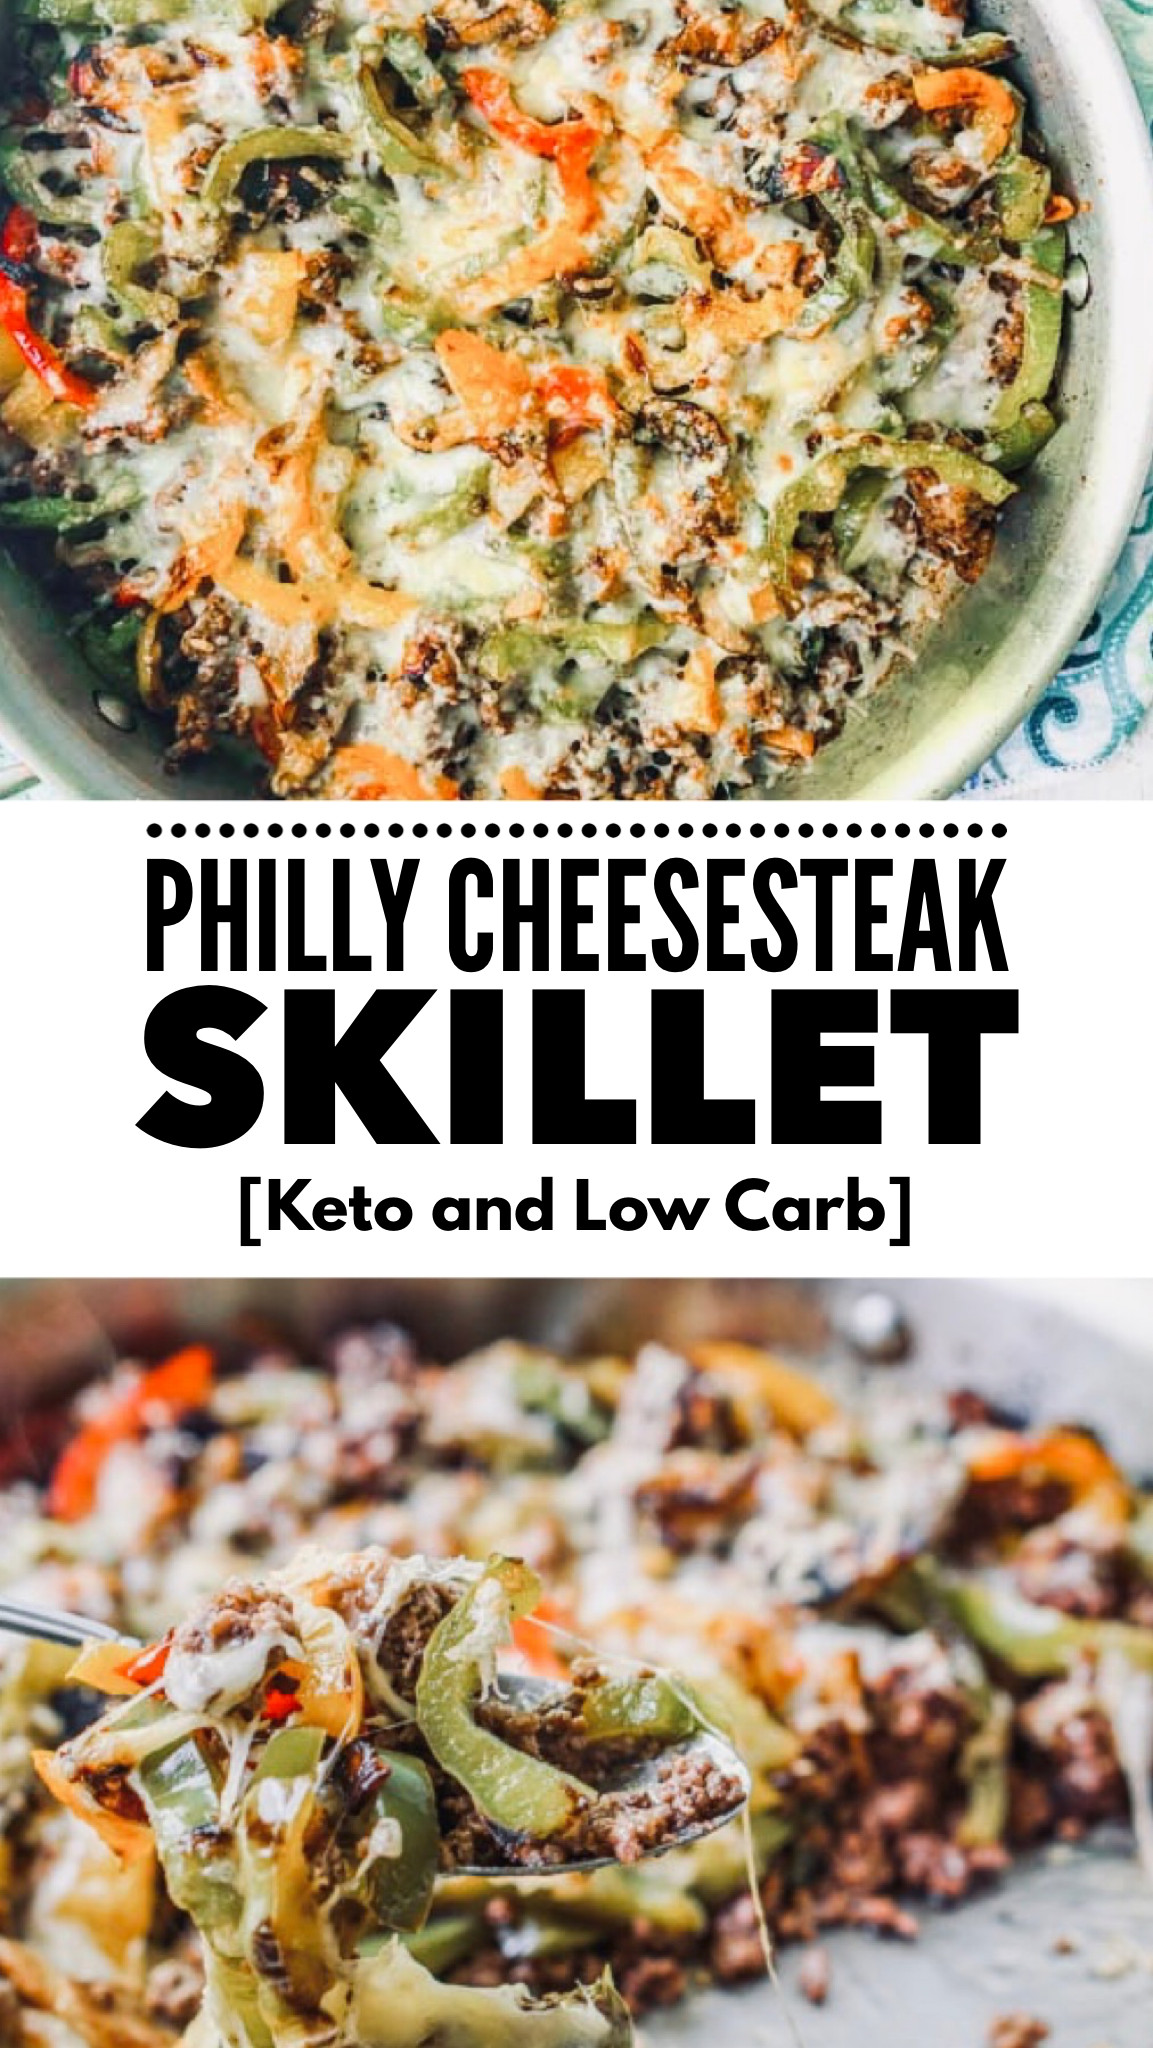 Low Carb Keto Cheesesteak Skillet
 Philly Cheesesteak Skillet [Keto and Low Carb in 2020